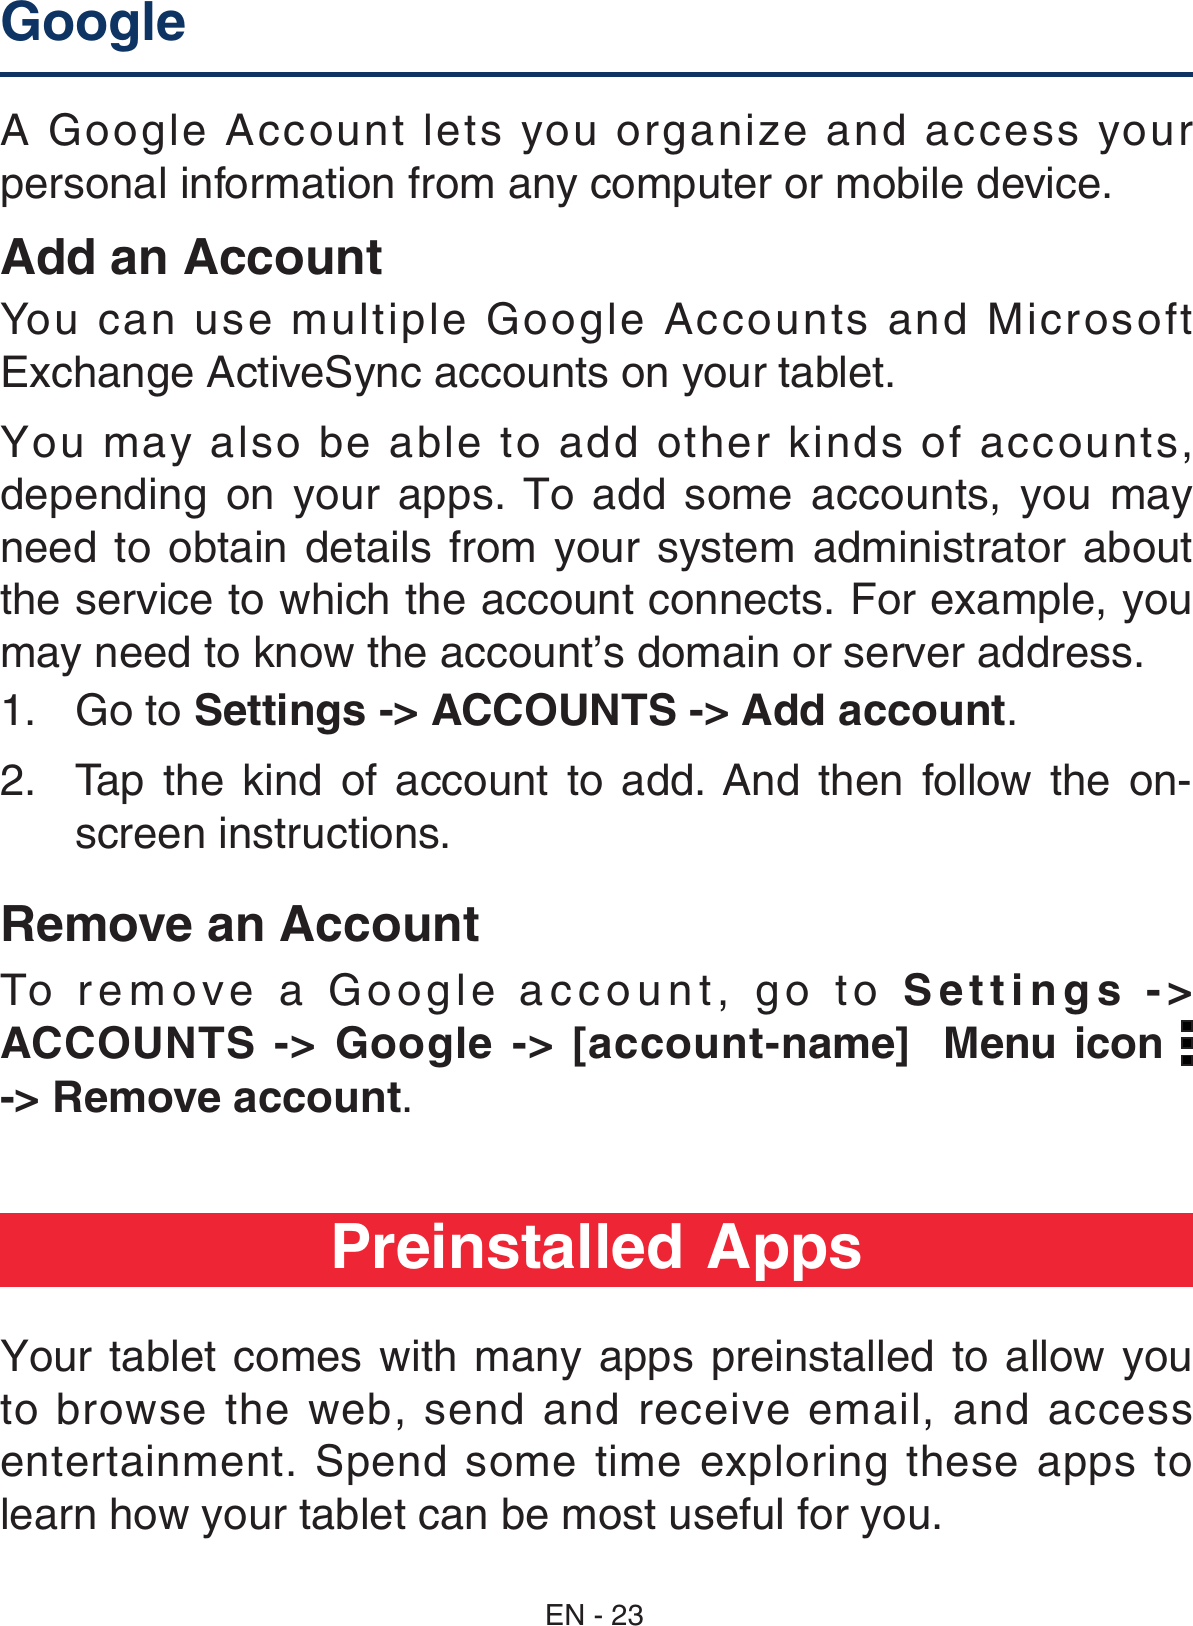 A Google Account lets you organize and access your personal information from any computer or mobile device. Add an AccountYou can use multiple Google Accounts and Microsoft Exchange ActiveSync accounts on your tablet. You may also be able to add other kinds of accounts, depending on your  apps. To  add  some  accounts,  you  may need  to  obtain  details  from your system  administrator  about the service to which the account connects. For example, you may need to know the account’s domain or server address.1.  Go to Settings -&gt; ACCOUNTS -&gt; Add account.2.  Tap  the  kind  of  account  to  add.  And  then  follow  the  on-screen instructions.Remove an AccountTo remove a Google account, go to Settings -&gt; ACCOUNTS  -&gt;  Google  -&gt;  [account-name]  Menu icon   -&gt; Remove account.Google   Preinstalled AppsYour tablet comes with many  apps  preinstalled to allow you to browse the web, send and receive email, and access entertainment. Spend some time exploring these apps to learn how your tablet can be most useful for you.EN - 23